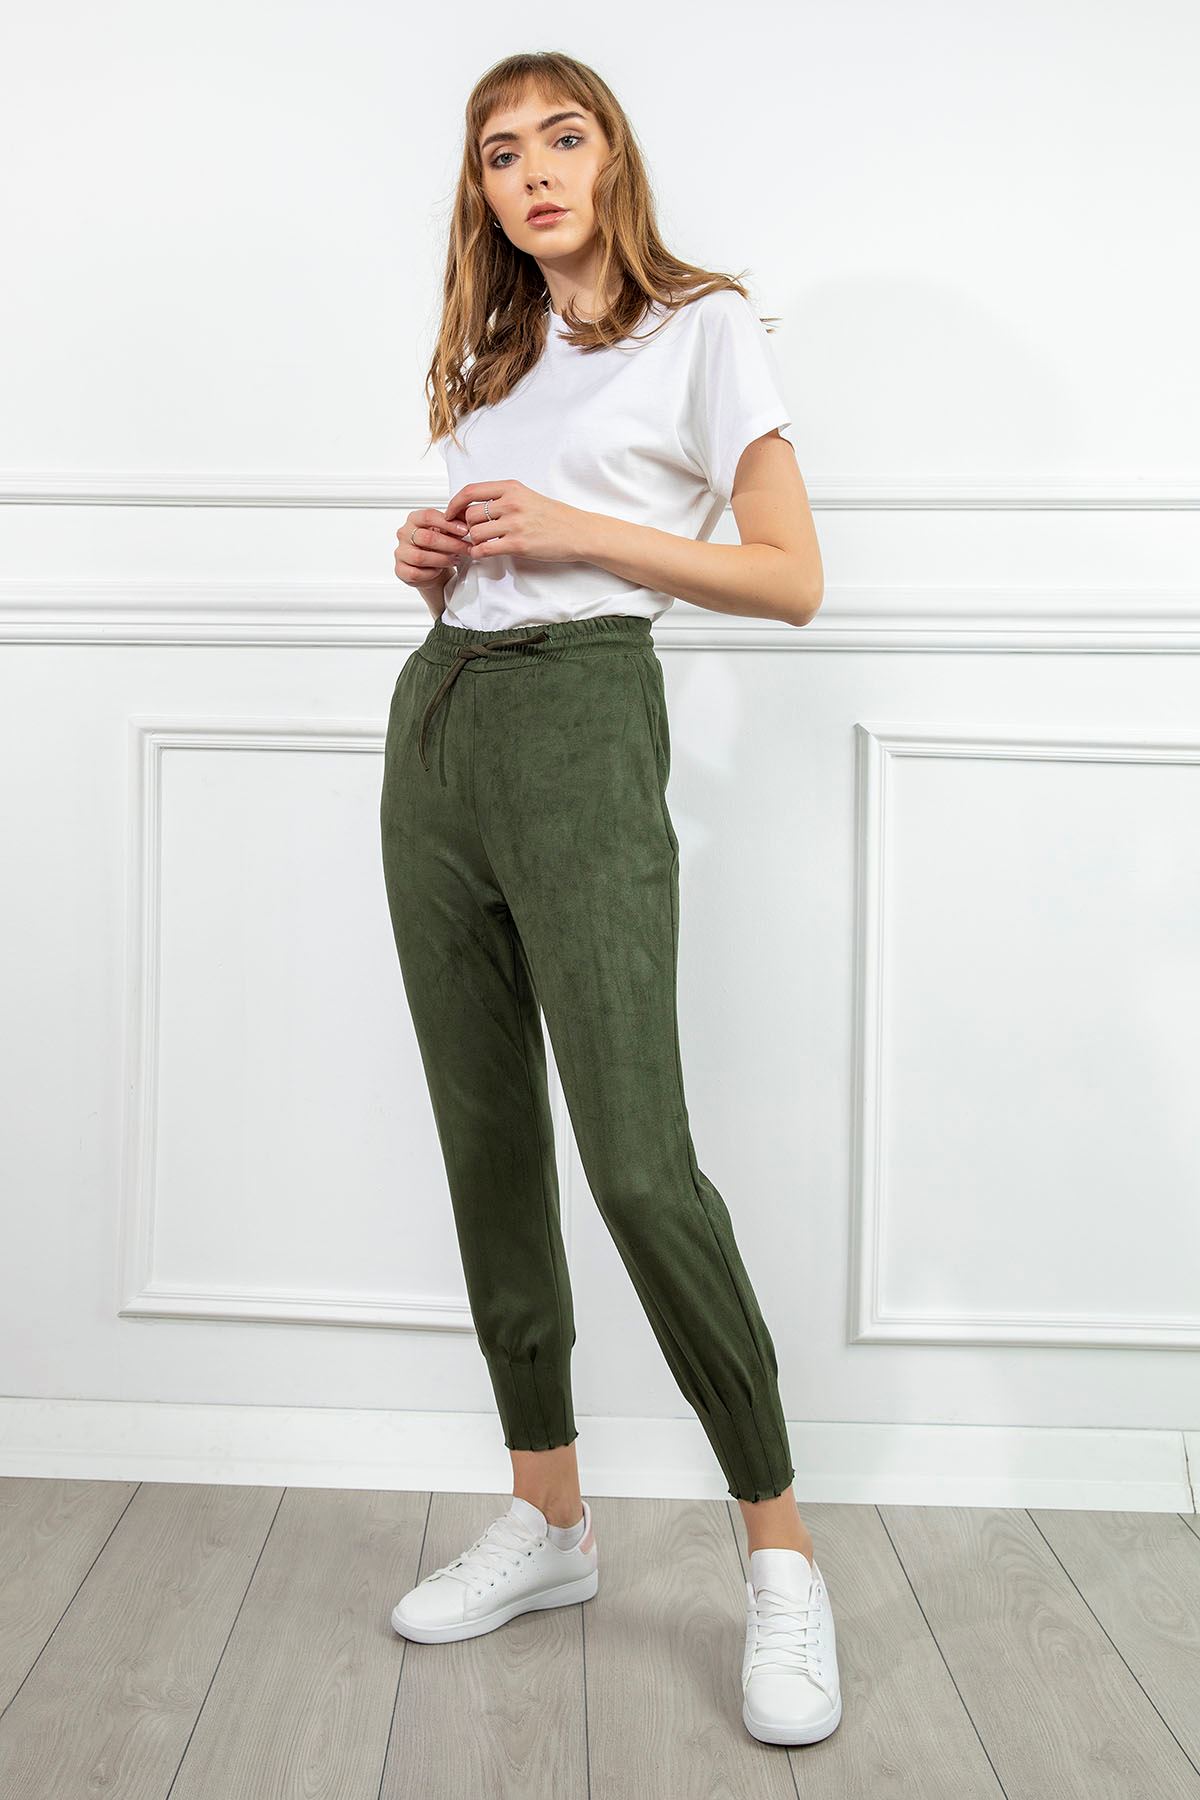 Suede Fabric Tight Fit Slited Women'S Trouser - Khaki 